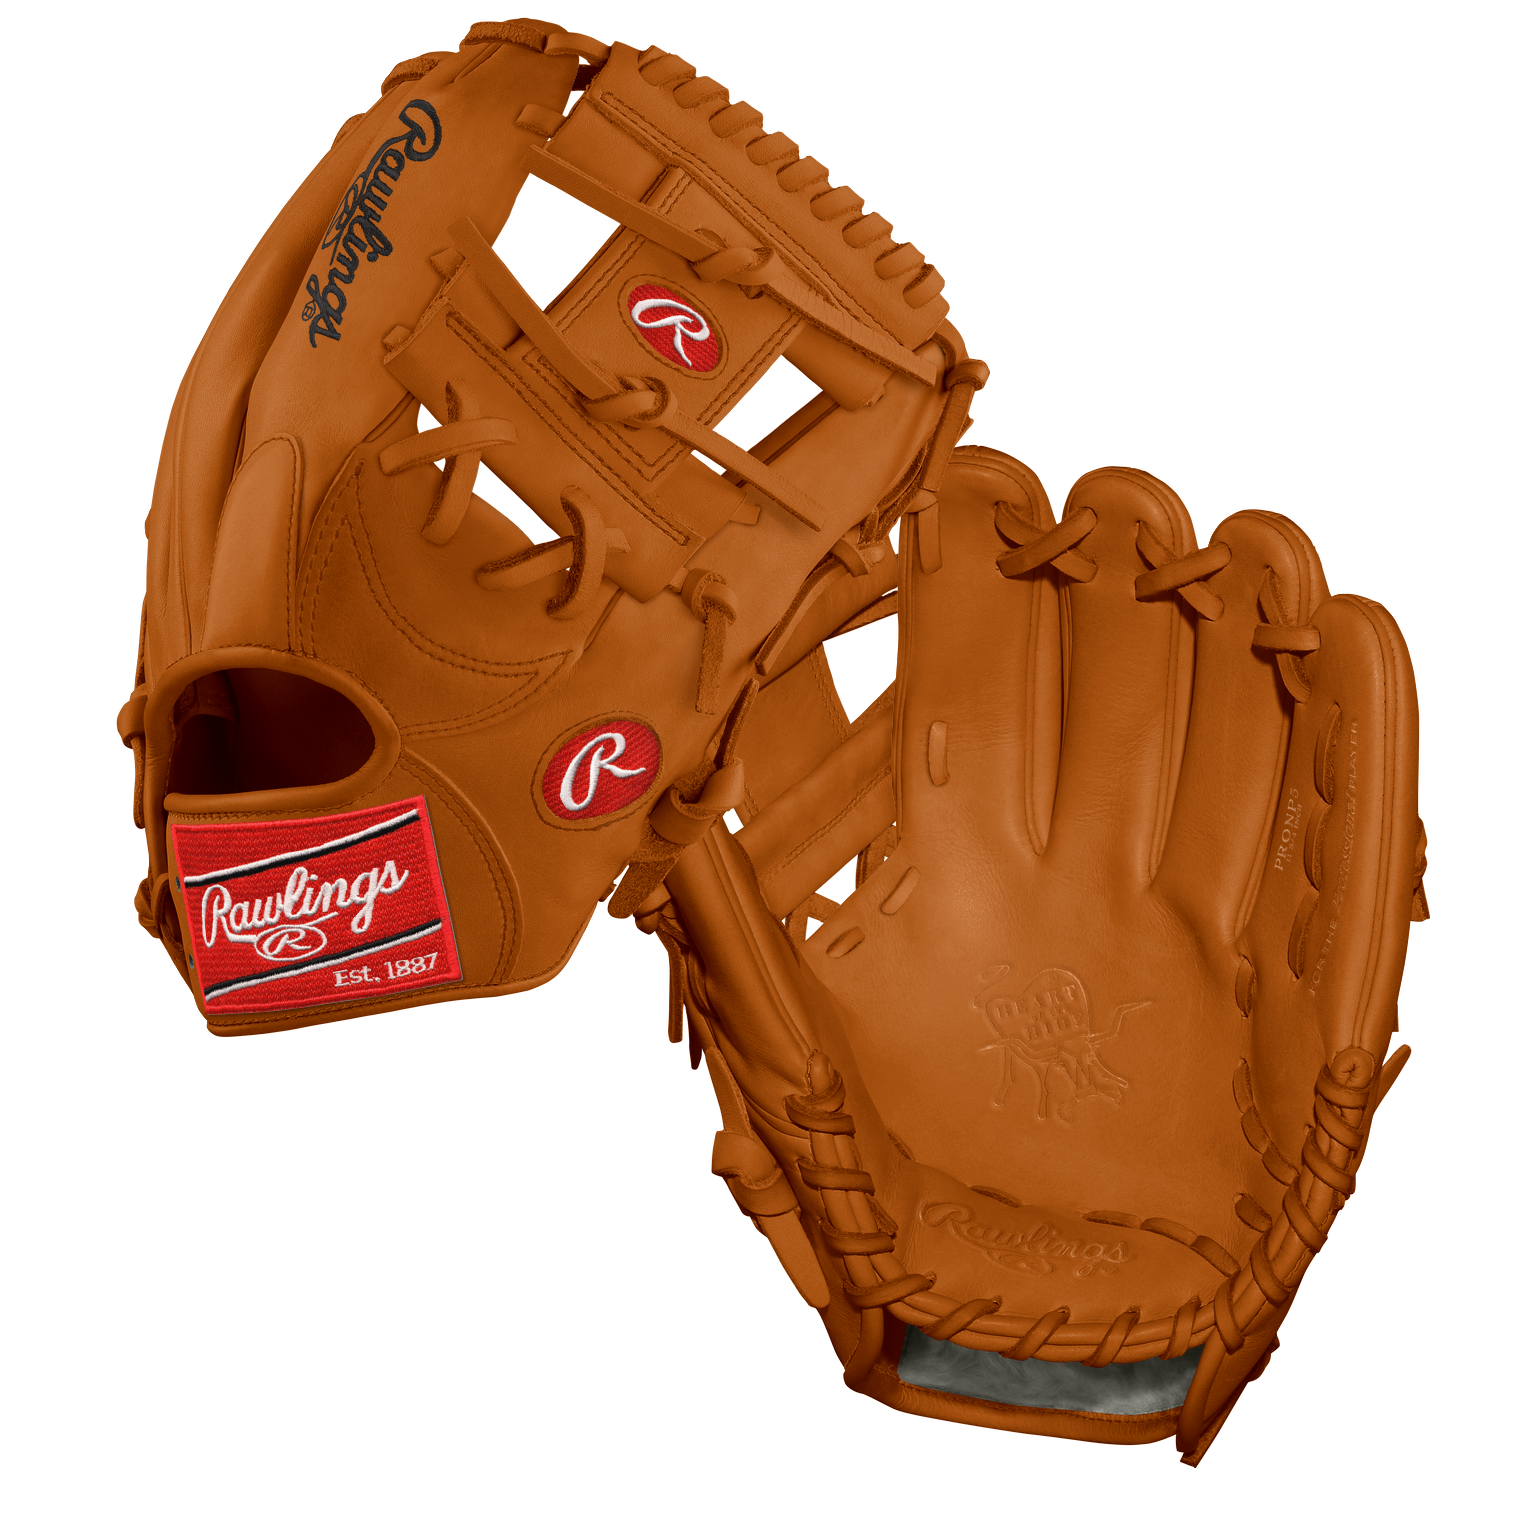       The Rawlings Heart of the Hide NP5 classic tan baseball glove is a high-quality glove designed specifically for infielders who demand top-notch performance and durability. With its exceptional craftsmanship and premium materials, this glove is a reliable companion on the baseball field. Crafted from genuine Heart of the Hide leather, this glove offers superior quality and durability. The Heart of the Hide leather is known for its ability to withstand the rigorous demands of the game, ensuring that the glove maintains its shape and performance over time. Designed with a standard fit, the Heart of the Hide NP5 glove is suitable for most adult level players. It is specifically designed for for infielders who need a glove that enhances their defensive skills. The glove features an 11 3/4 size, striking a balance between a larger catching surface and excellent maneuverability. The Heart of the Hide NP5 glove showcases a Pro I web design, which combines flexibility and stability. This web style offers exceptional ball control, enabling infielders to secure and release the ball quickly and accurately. The Pro I web is the most popular choice amoung infielders. In terms of aesthetics, the Heart of the Hide NP5 glove features a tan color with a white-on-scarlet logo patch, representing the iconic classic Rawlings branding. The tan leather shell, palm, laces, and lining contribute to the glove's classic and professional look. The palm rolled welting, as well as the tan rolled welting on the back, enhance the structural integrity of the glove, ensuring long-lasting performance. The tan binding adds a touch of refinement to the overall design. The glove is assembled using tan stitching, which complements the overall aesthetic. The Rawlings Heart of the Hide NP5 glove is adorned with indent stamping, adding a distinctive touch to the design.  To ensure a comfortable fit, the glove is equipped with a thermo-formed wrist lining that wicks away moisture.  The Rawlings Heart of the Hide NP5 baseball glove, with its Pattern NP5, offers infielders a premium glove with exceptional performance and durability. With its Heart of the Hide leather, Pro I web design, and meticulous attention to detail, this glove delivers a combination of style, comfort, and functionality that is sure to elevate your game on the baseball field.  Pattern NP5 Sport Baseball Leather Heart of the Hide Fit Standard Throwing Hand Right-Hand Throw Position Infield Size 11 3/4 Web Pro I  Color Tan Logo Patch White on Scarlet Leather Tan Shell PalmTan Laces Tan Lining Tan Welting Palm Tan Welting Back Tan Binding Tan Tan Stitching Tan Stamping Wrist Lining Thermo Formed                   